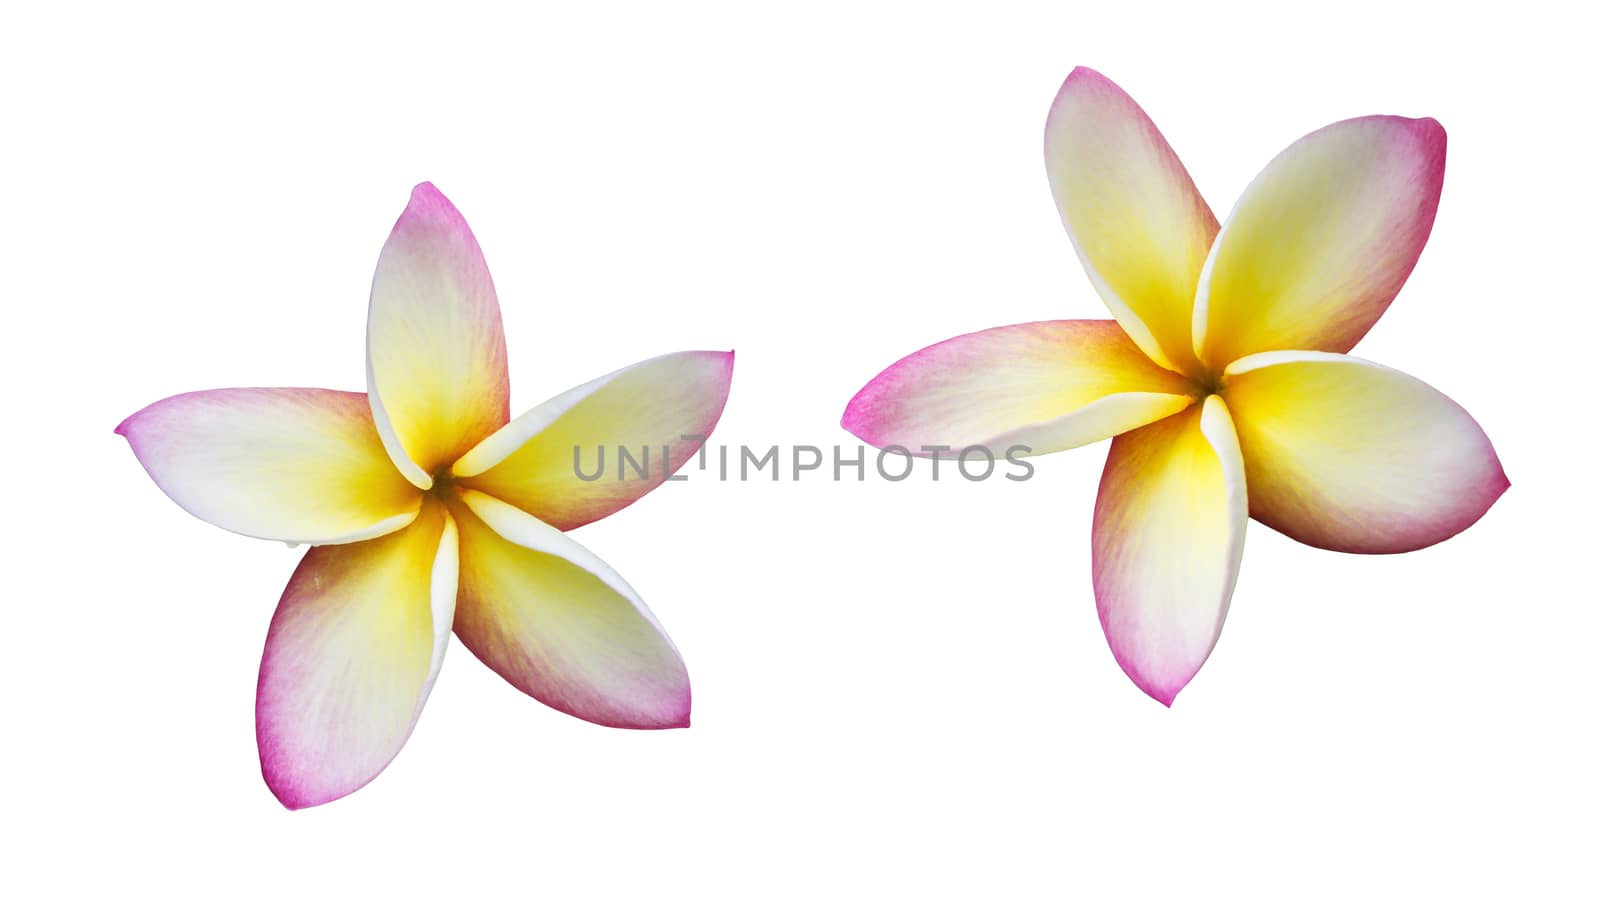 Isolated beautiful sweet pink yellow and white flower plumeria or frangipani on white background with clipping path, Two pieces of isolated plumeria or frangipani flowers 